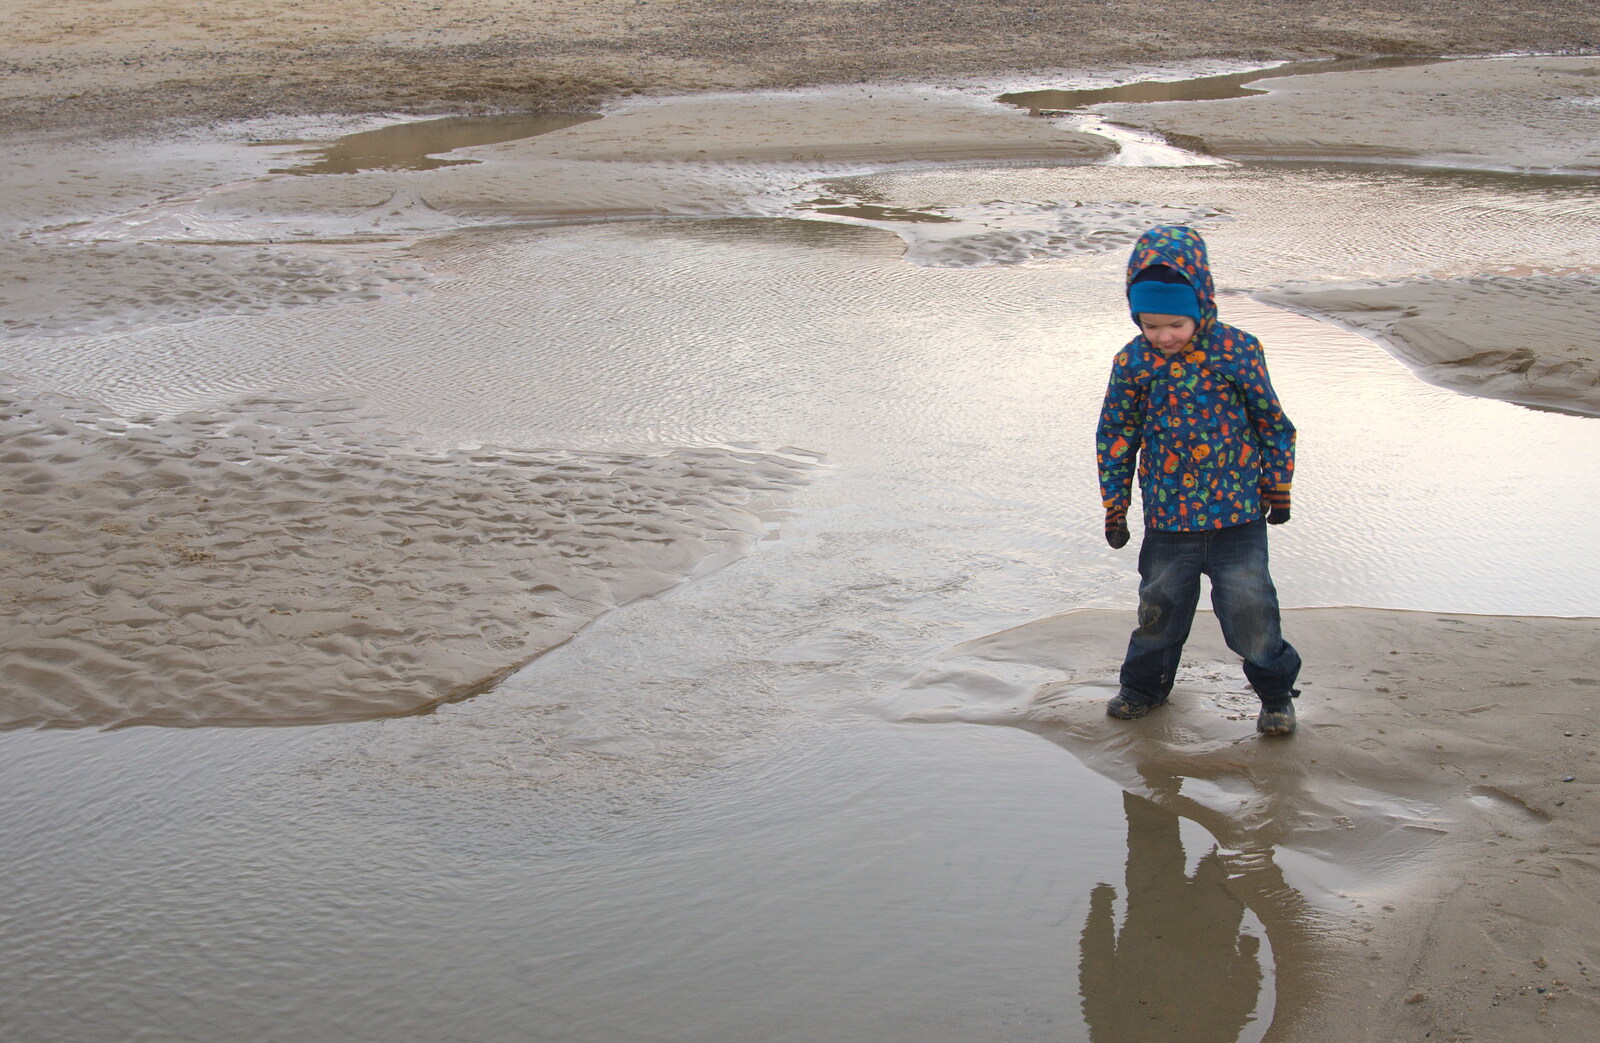 Harry in the stream from Horsey Seals and Sea Palling, Norfolk Coast - 2nd January 2017